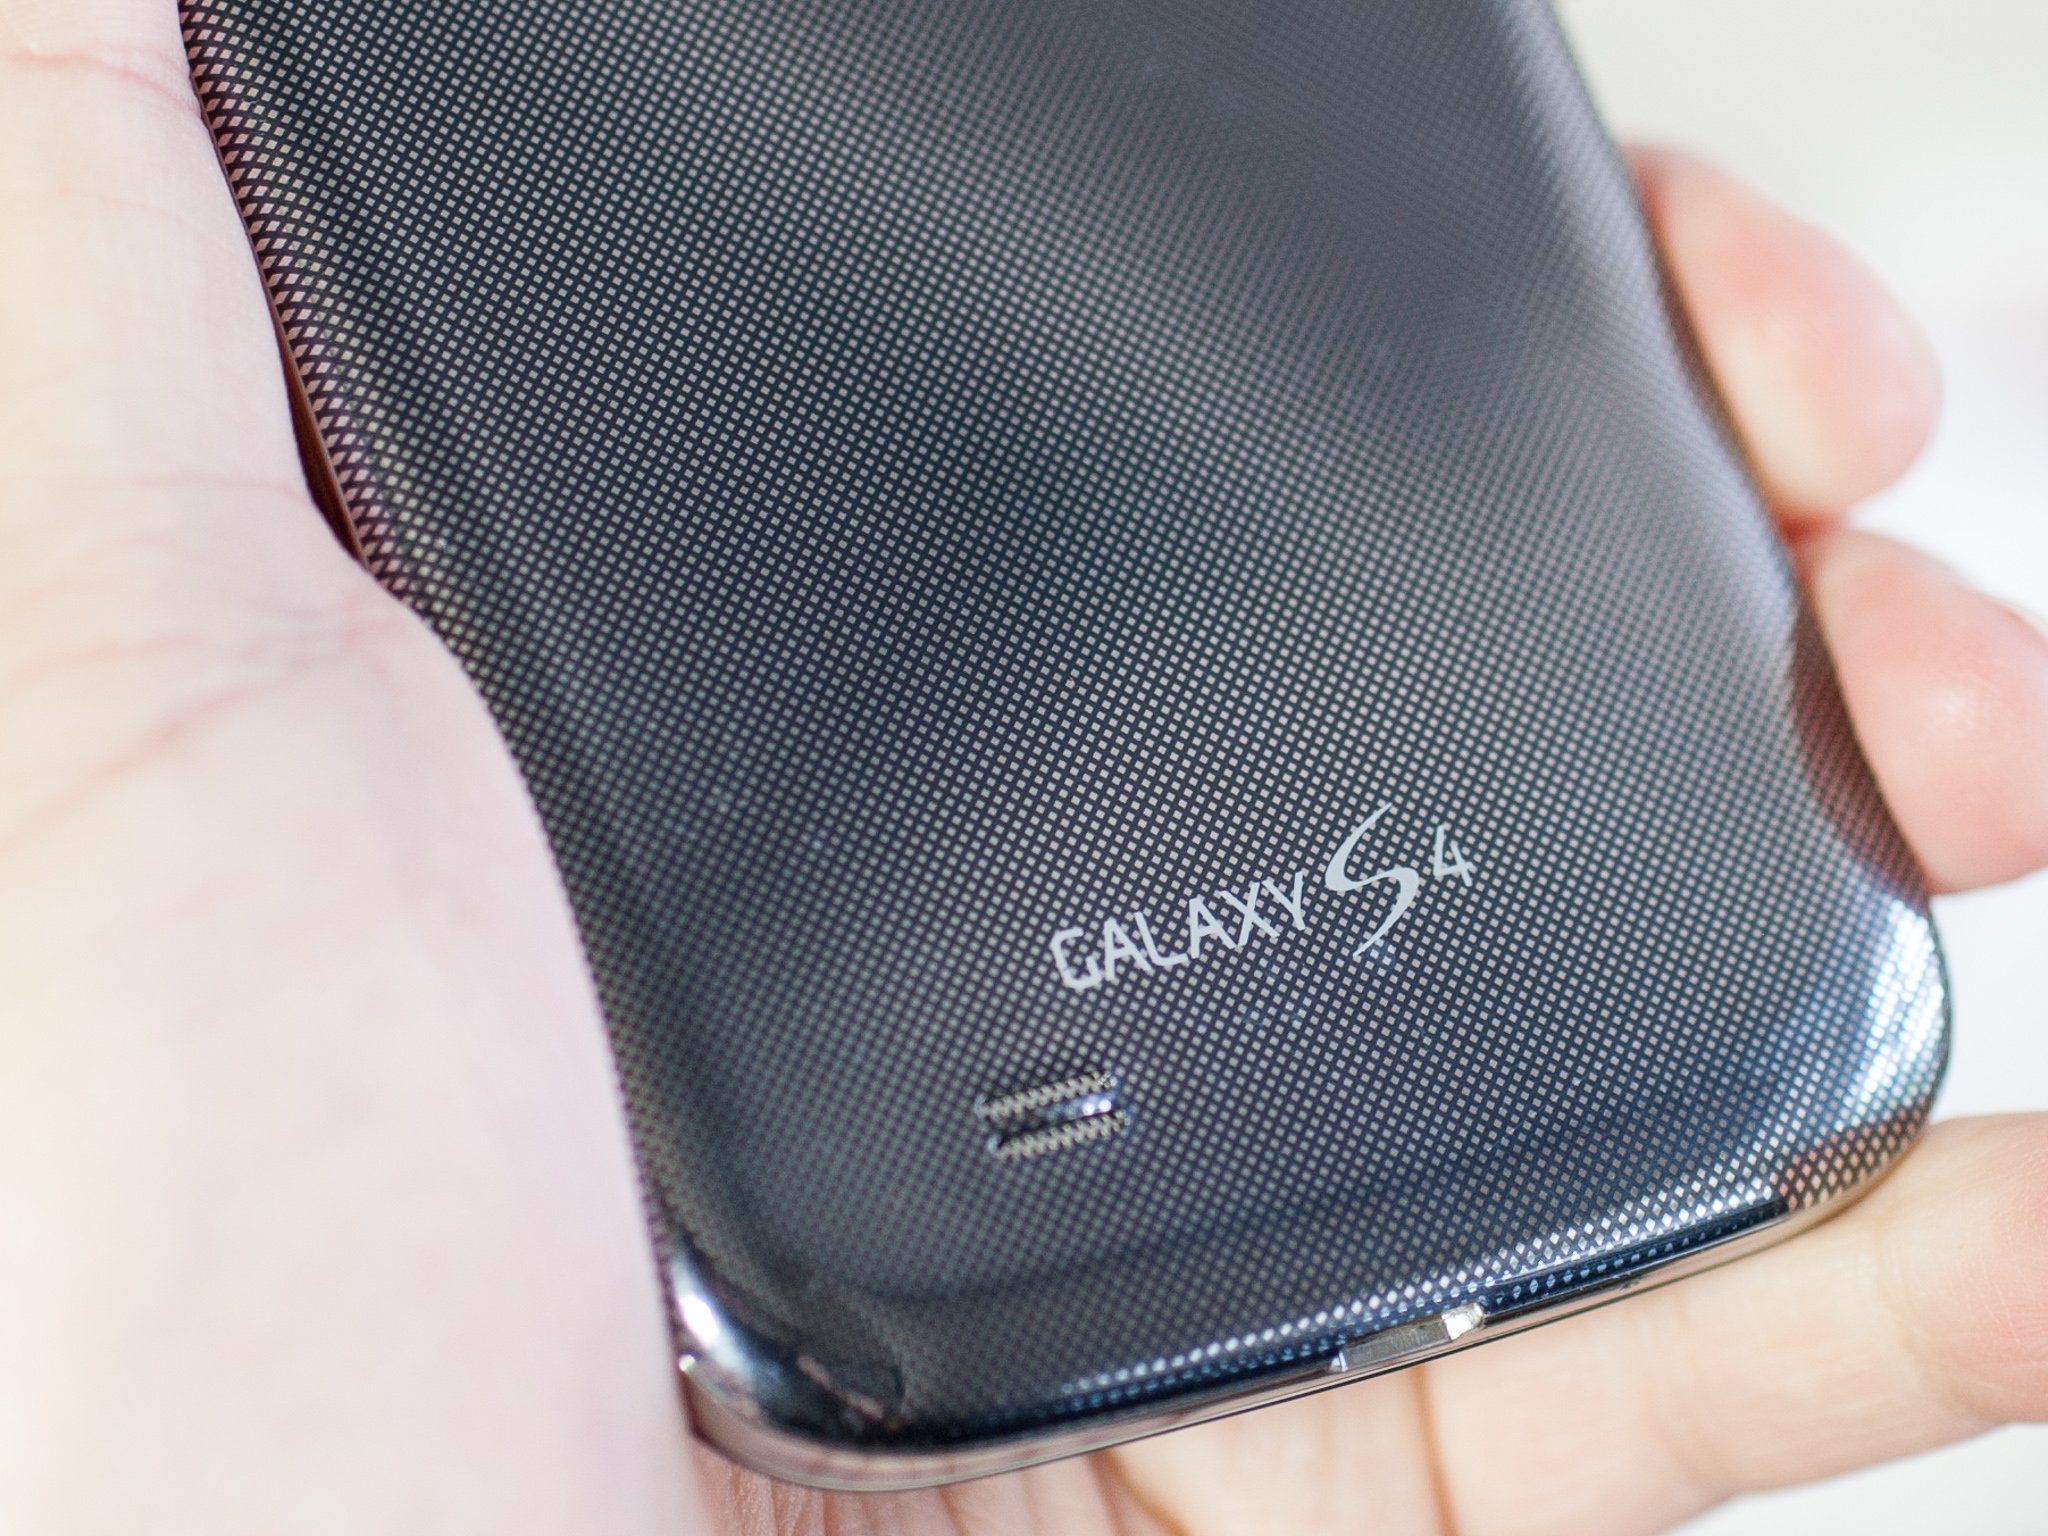 Verizon starts rolling out Android 5.0.1 Lollipop to the Galaxy S4